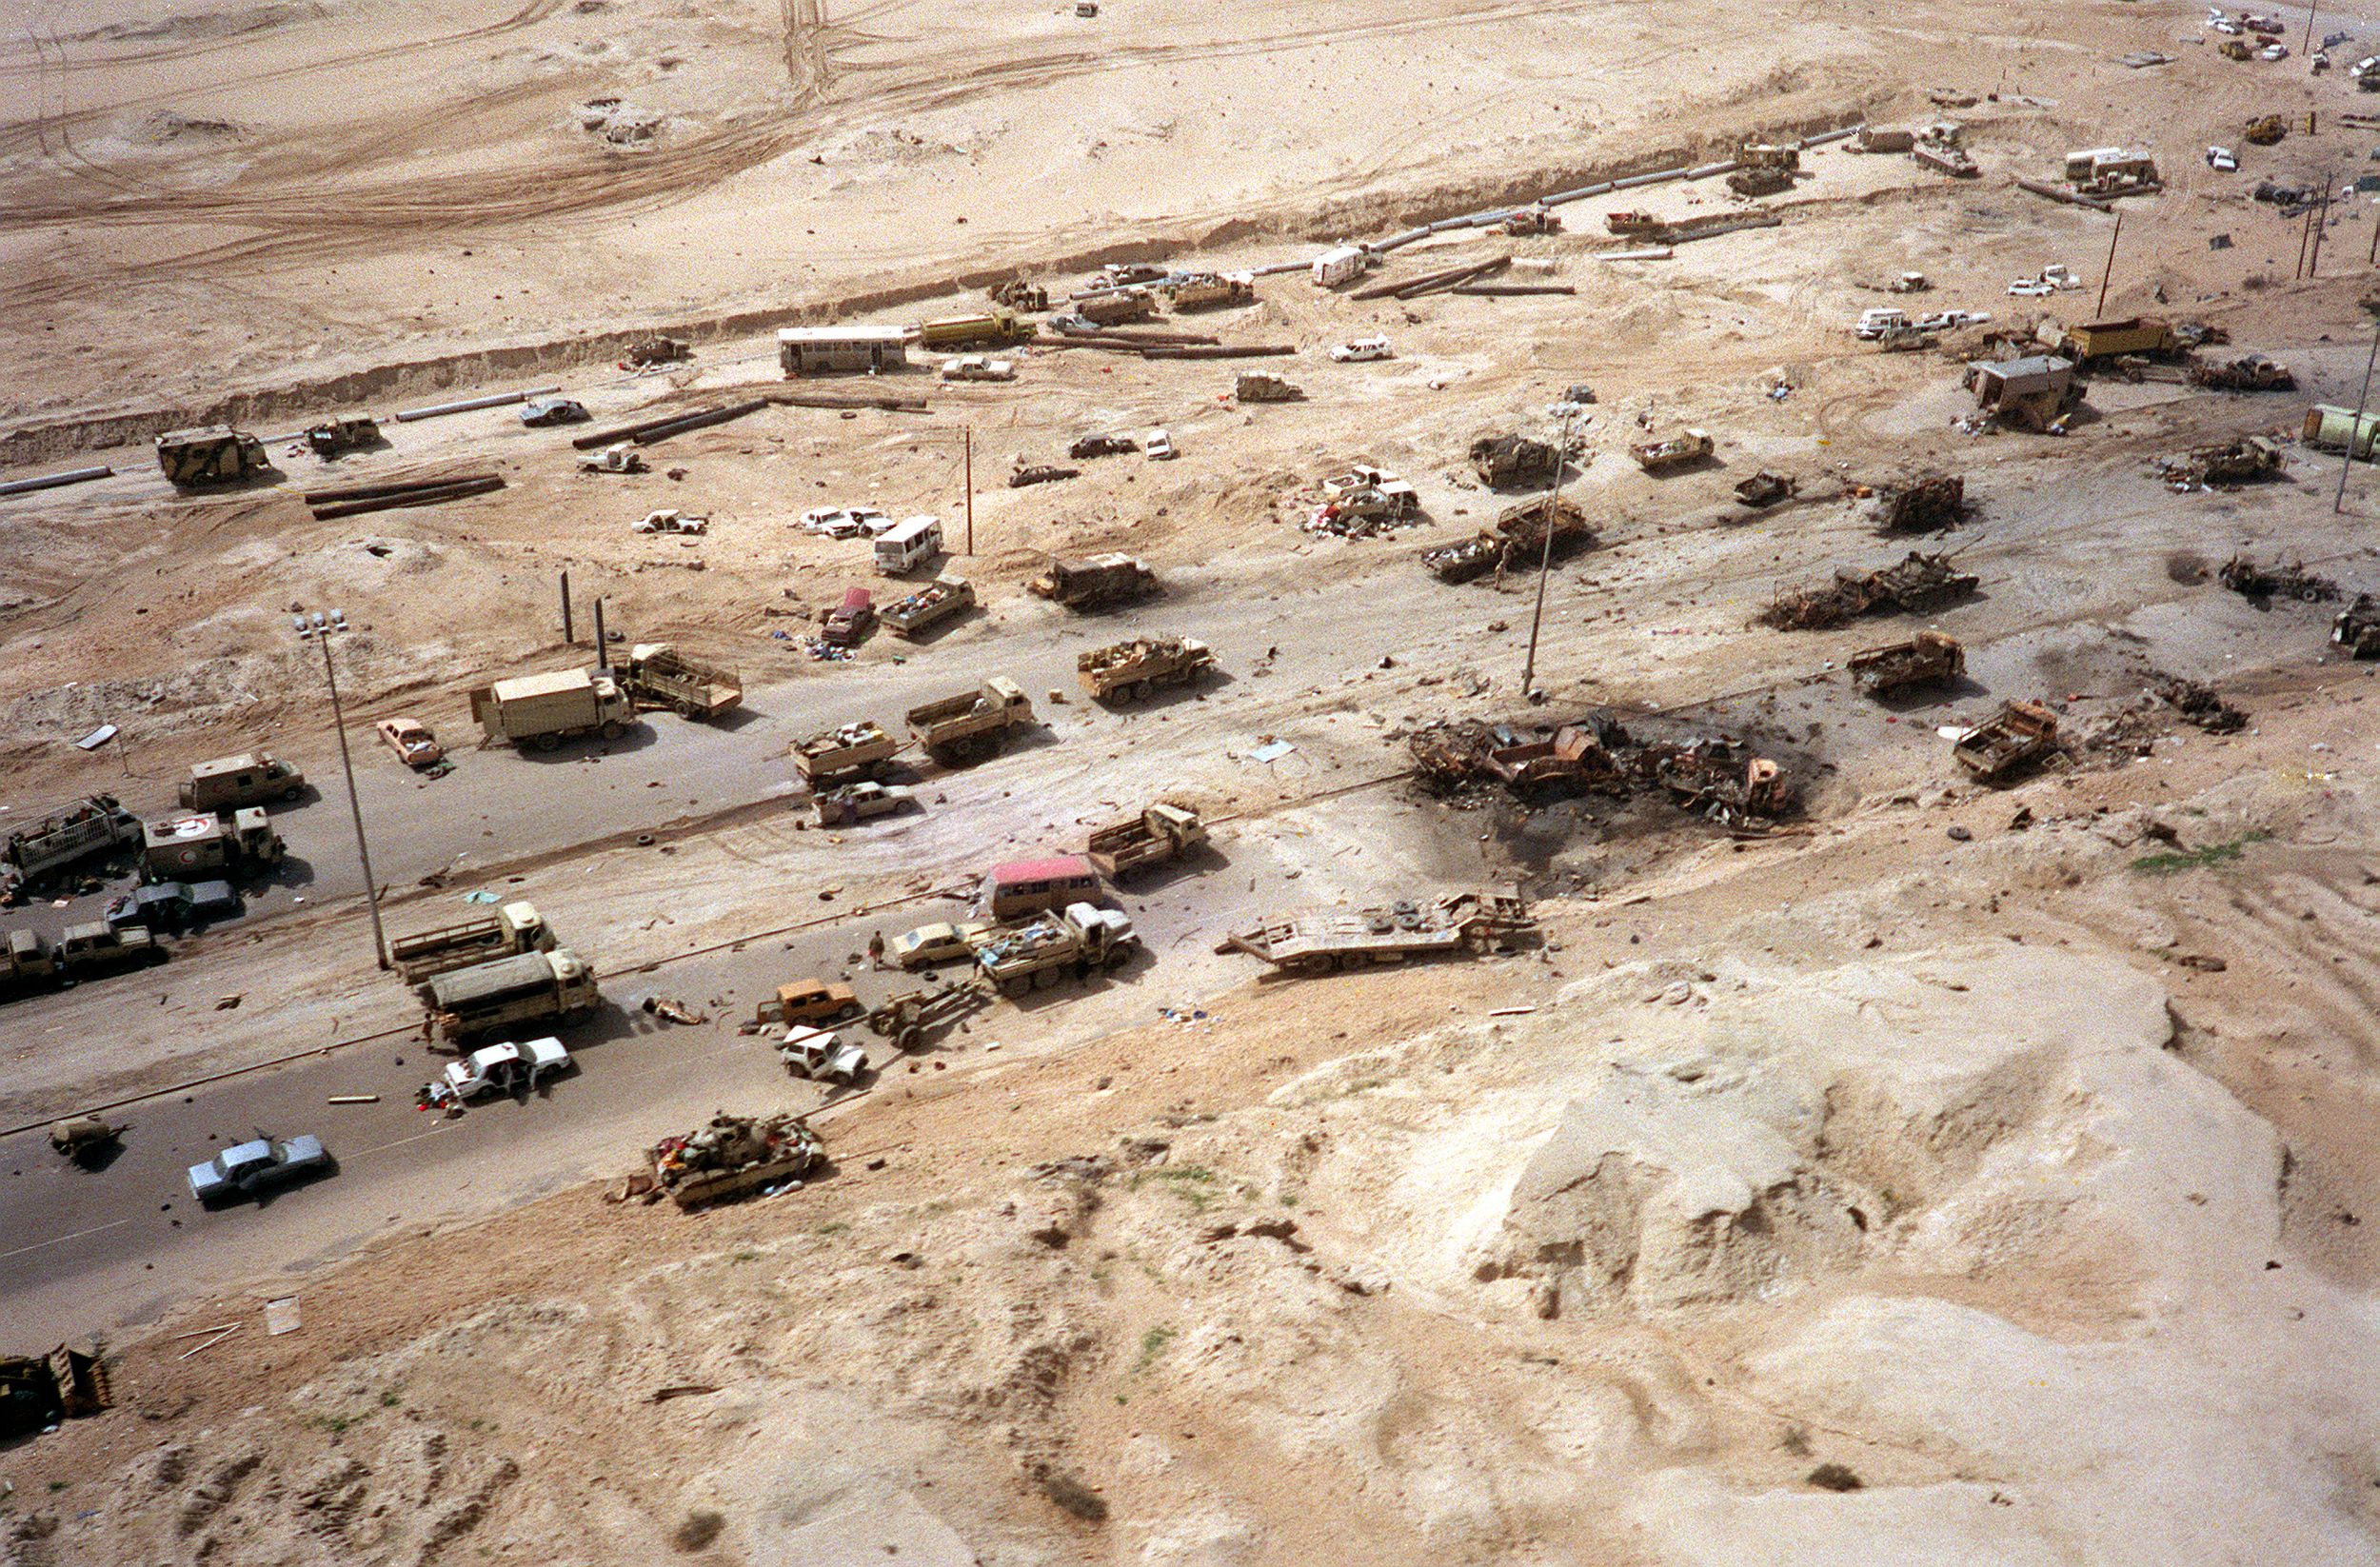 U.S. aircraft destroyed as many as 2,000 vehicles on February 26 as Iraqi forces fled west from Kuwait along six-lane Highway 80. General Norman Schwarzkopf defended the strikes on the grounds that he wanted to destroy as much Iraqi military equipment as possible.